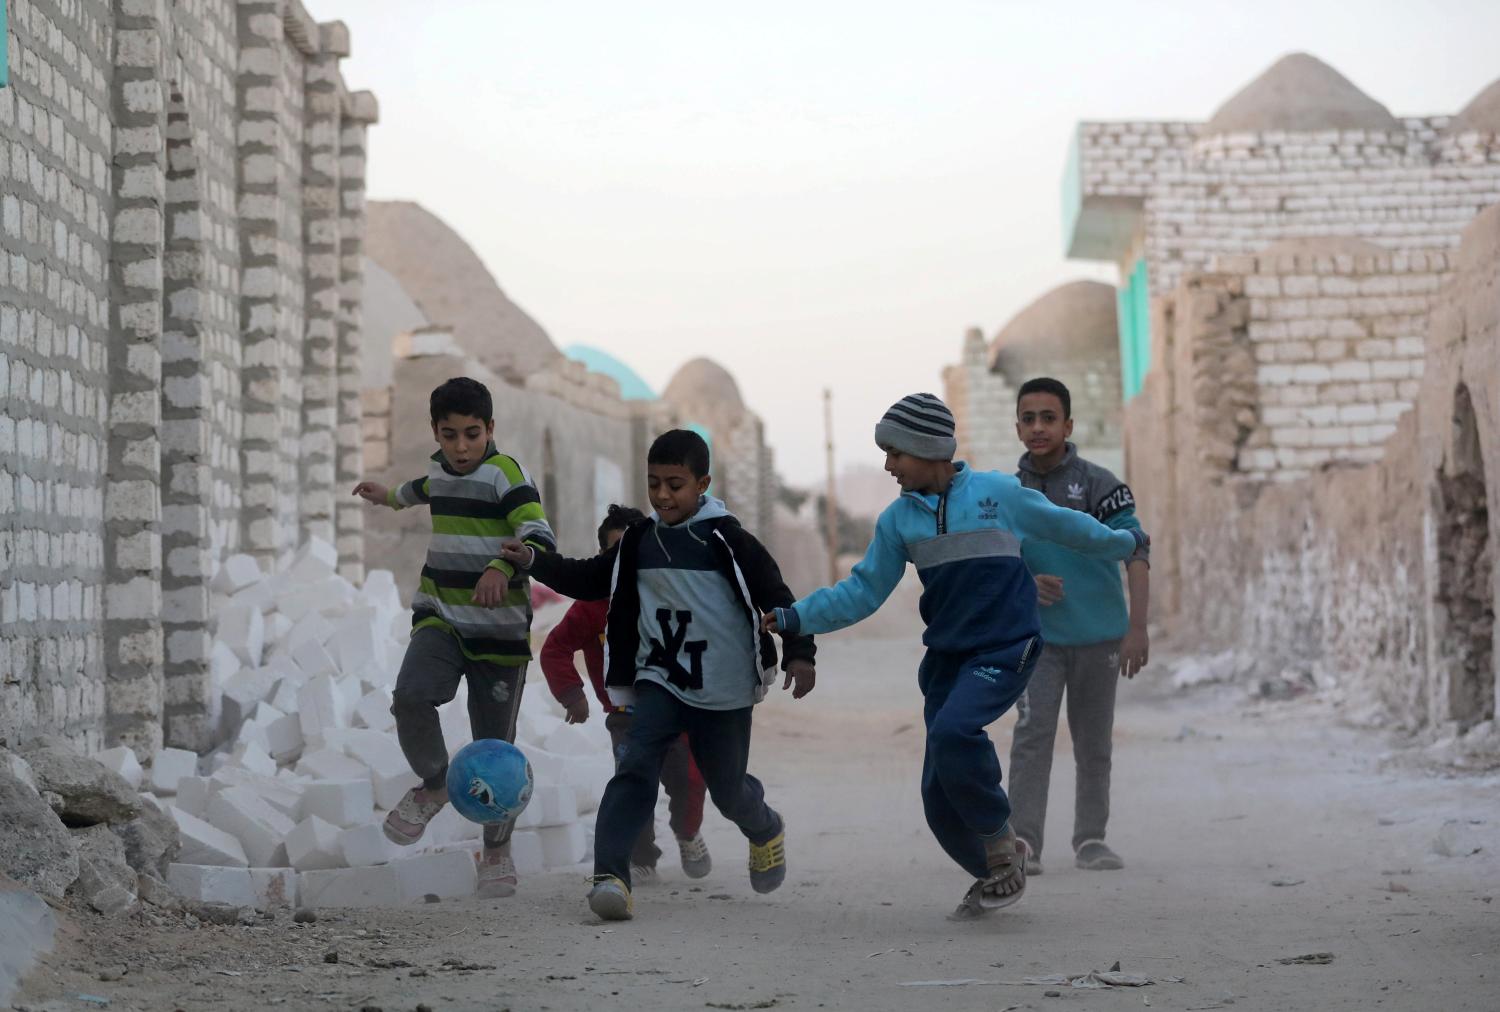 Children play football at the graveyards (City of the Dead) called locally "Zawiyyet al-Mayyiteen" in Minya Governorate, Upper Egypt January 8, 2019. REUTERS/Mohamed Abd El Ghany - RC1217CE1350